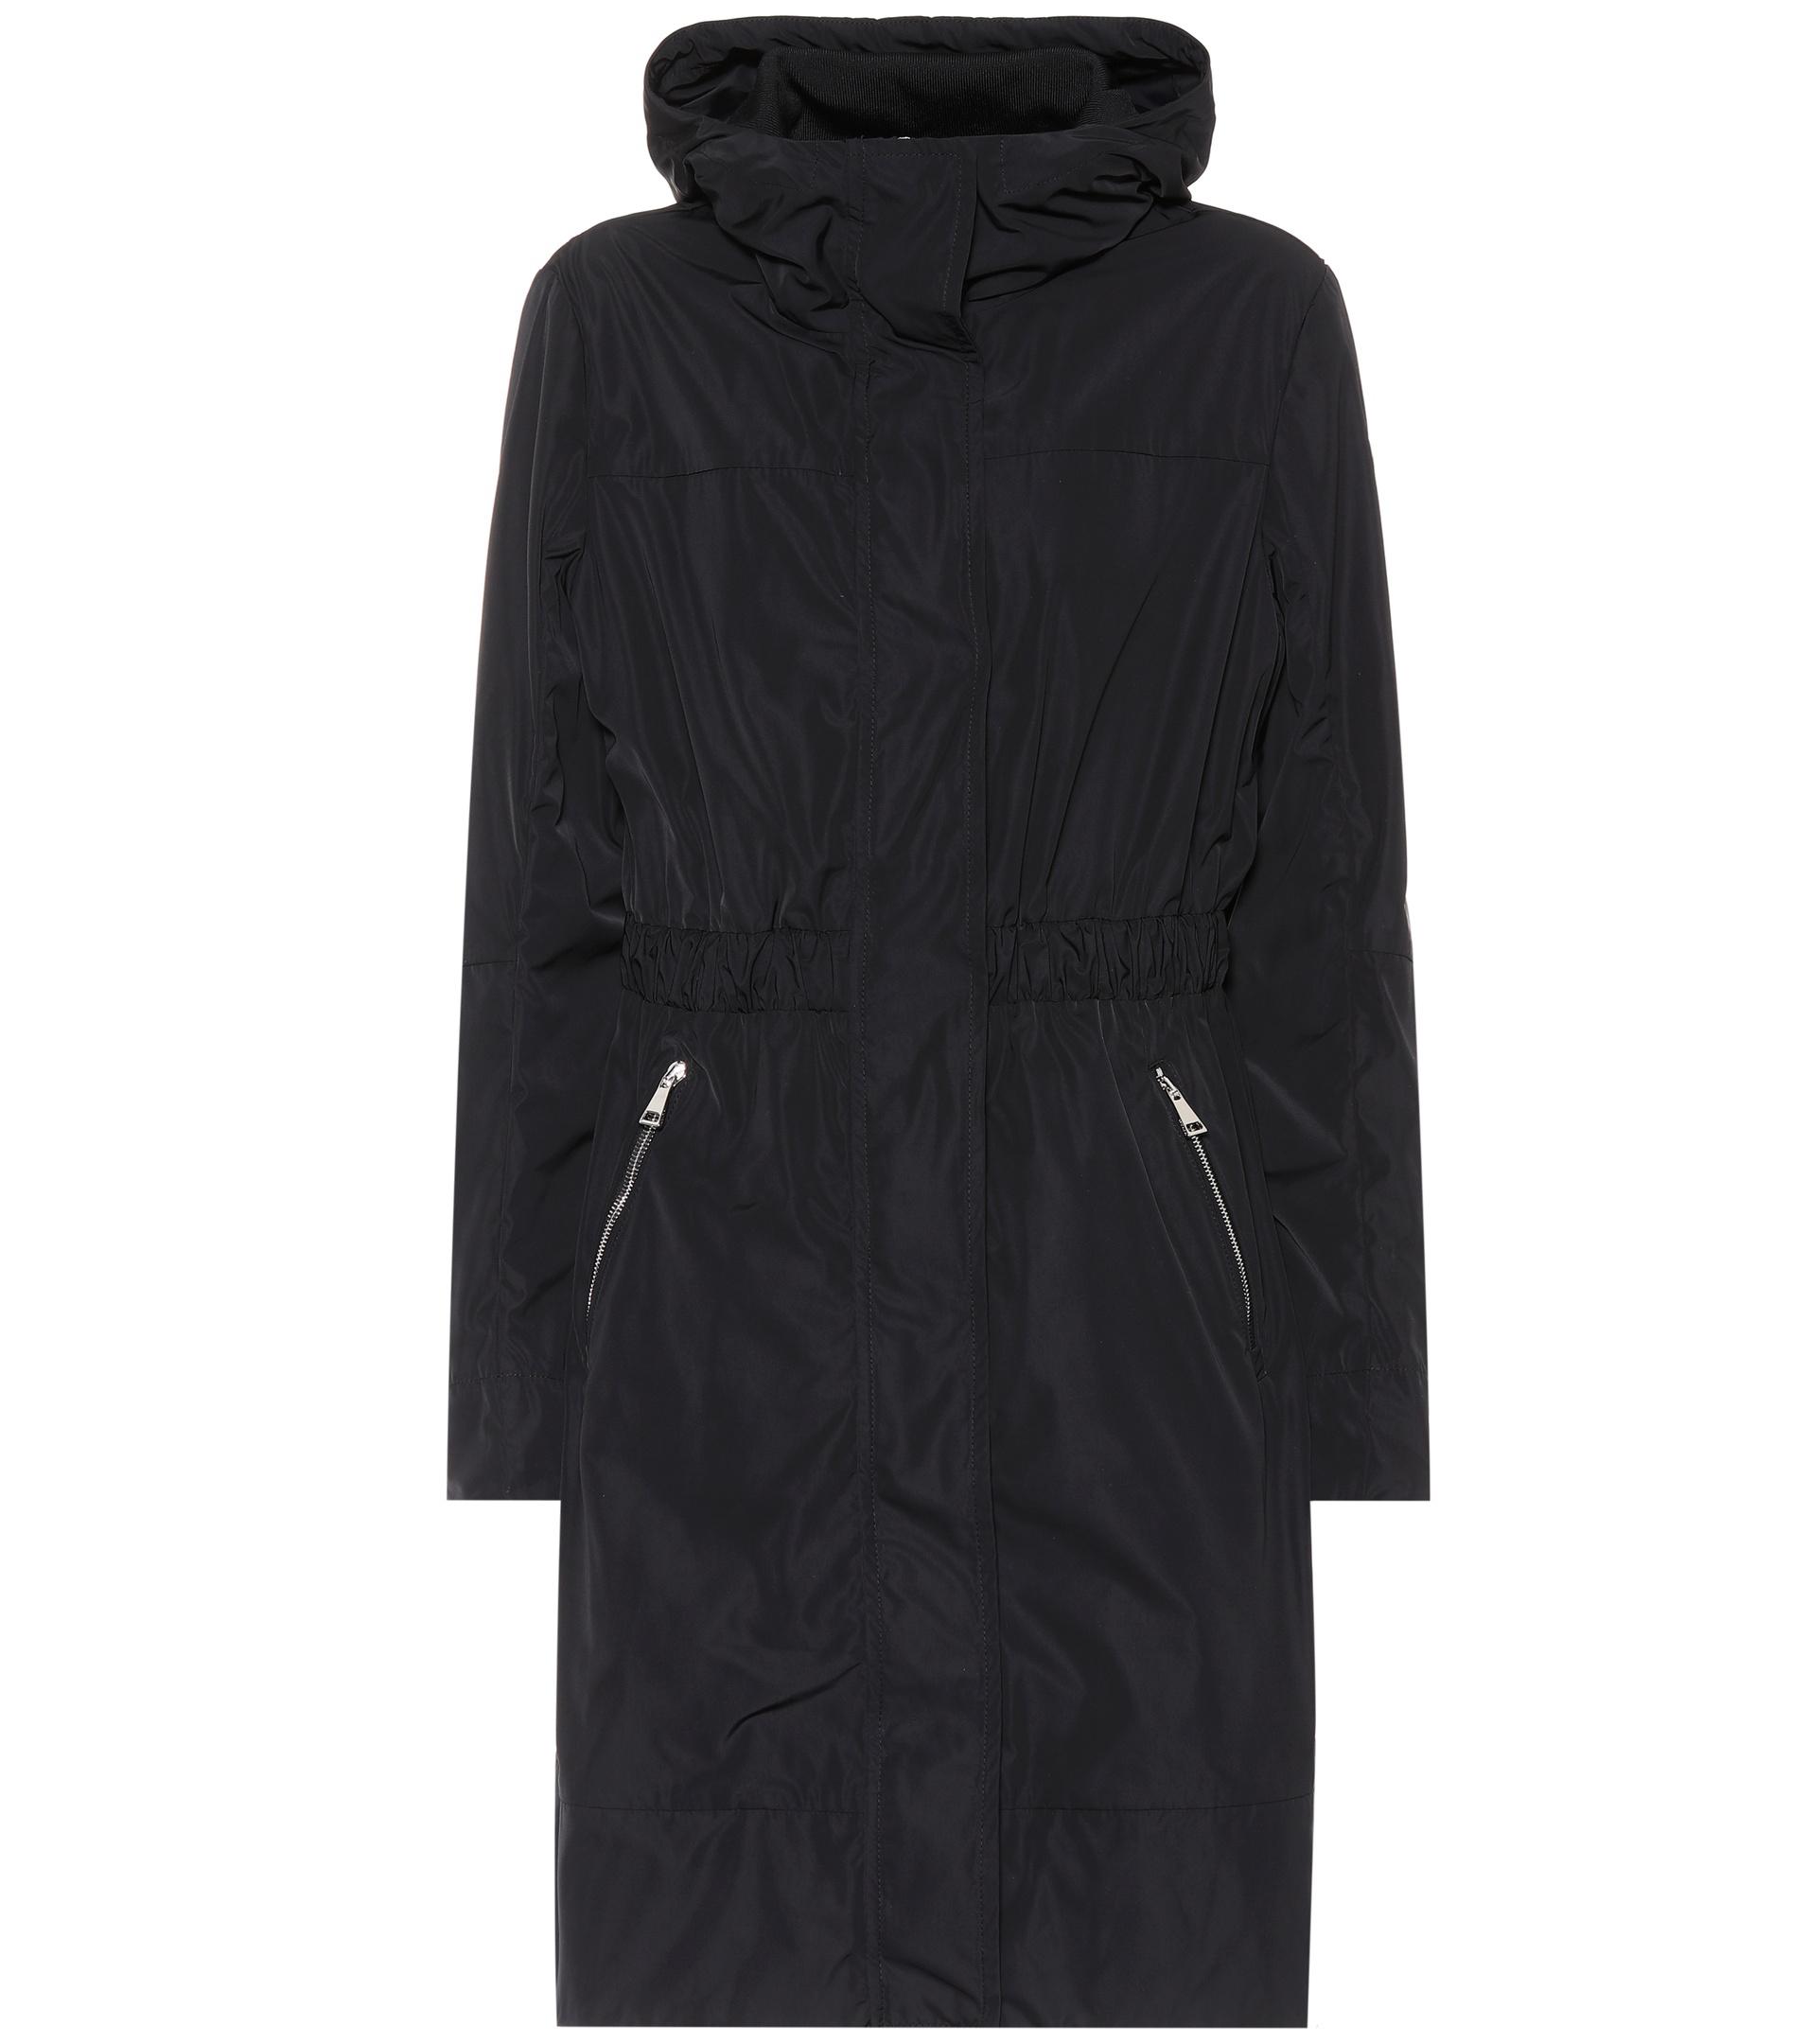 Moncler Synthetic Disthelon Raincoat in Black - Lyst